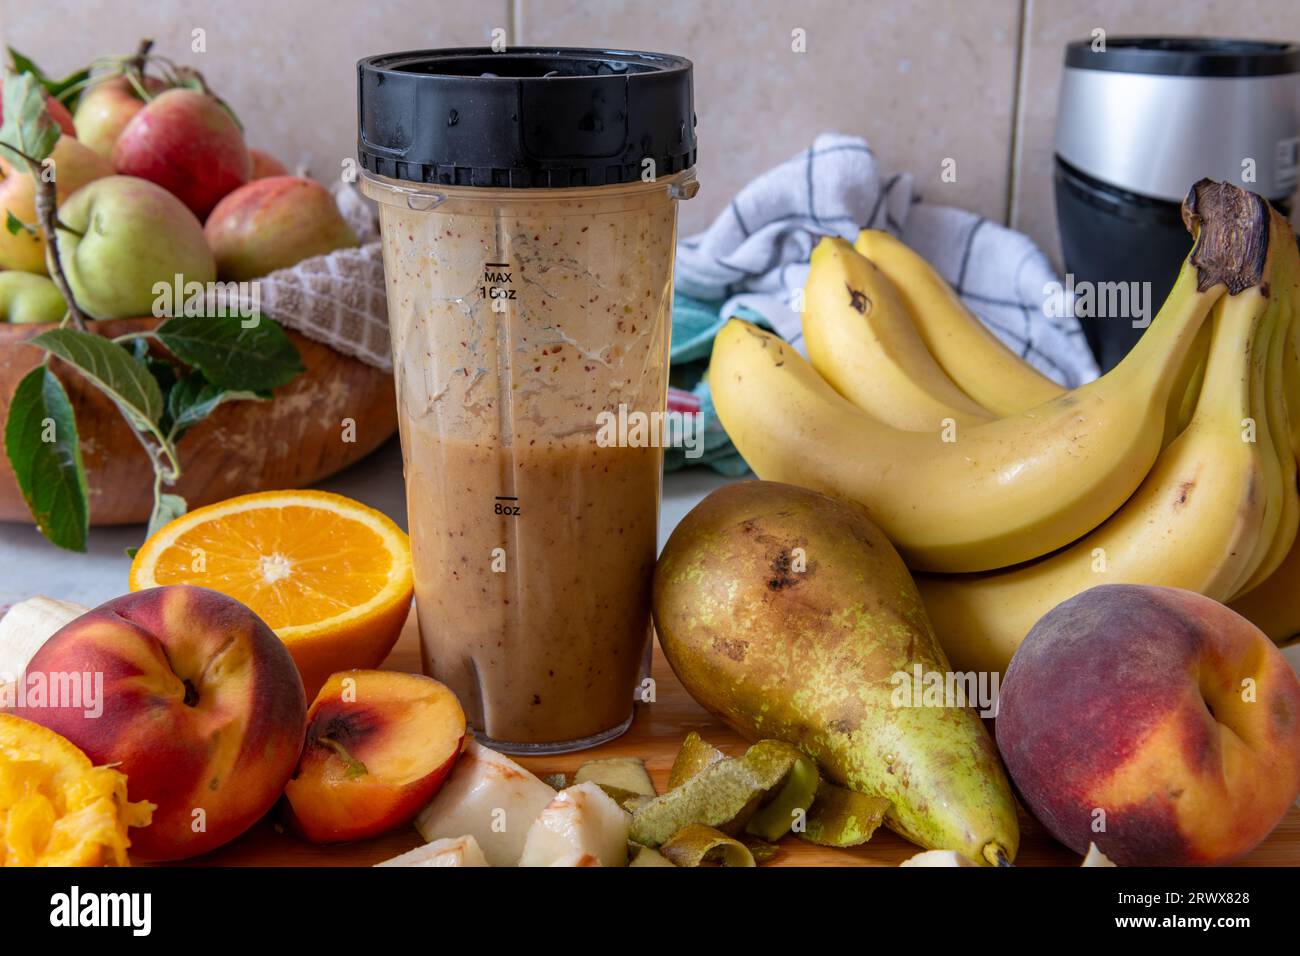 Making a smoothie with fresh fruits in a blender. Healthy life style, health food concept. Stock Photo